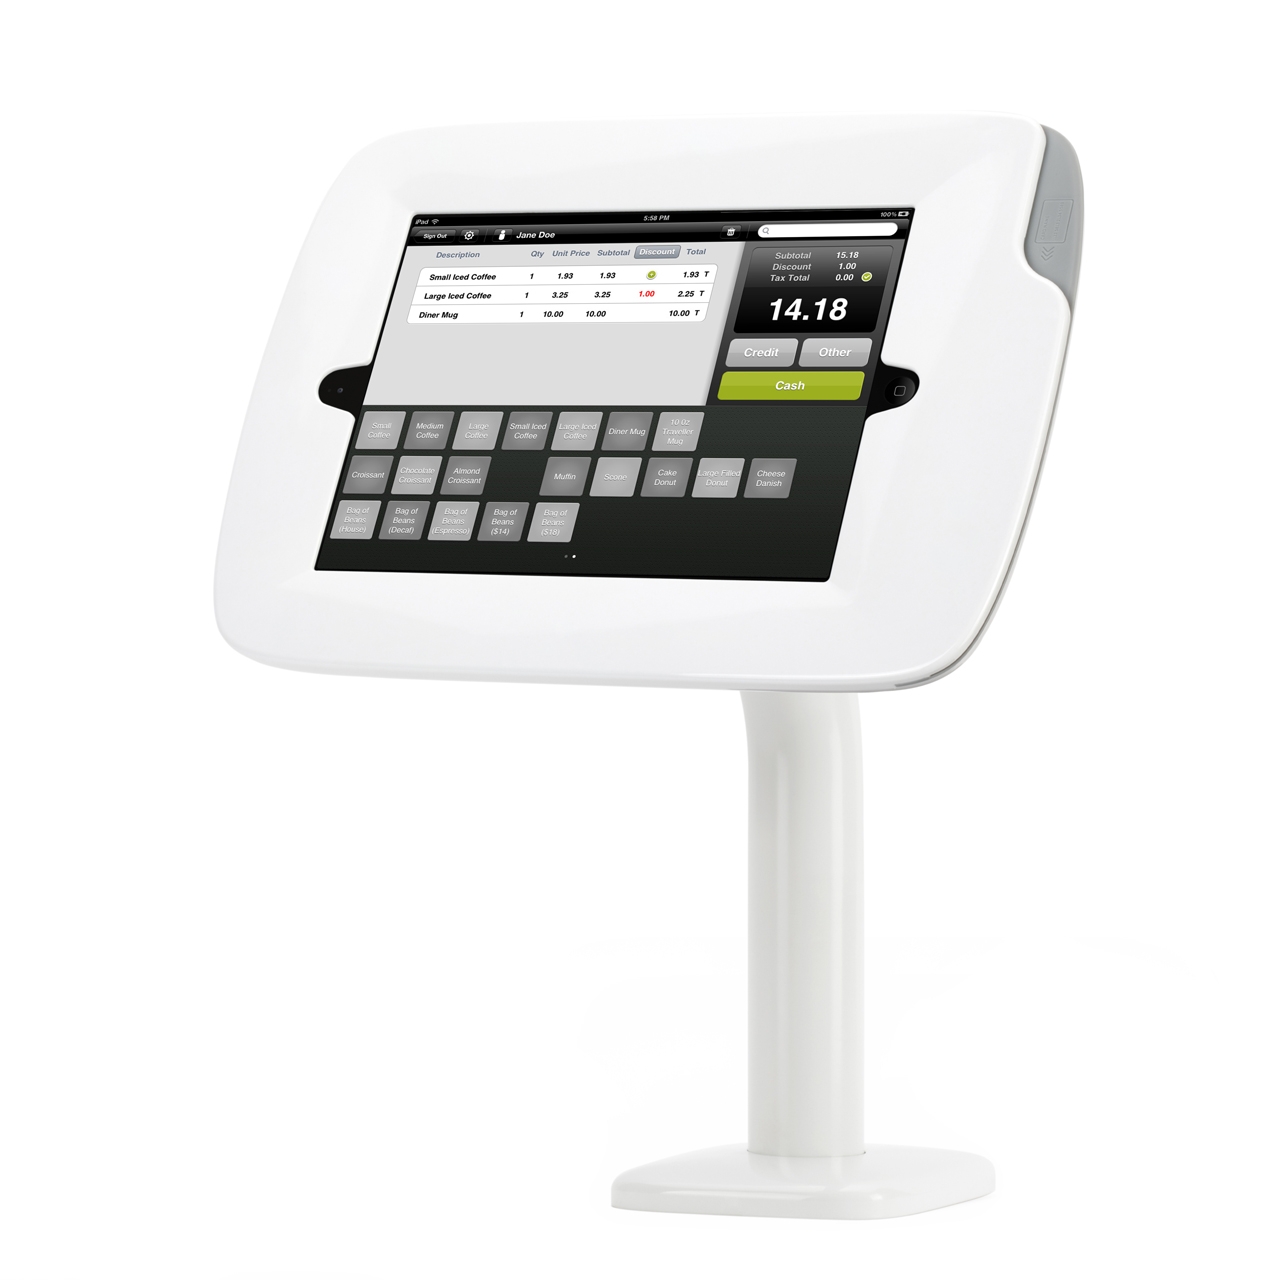 http://www.retailsystems.org/automation/griffin-ipad.jpg